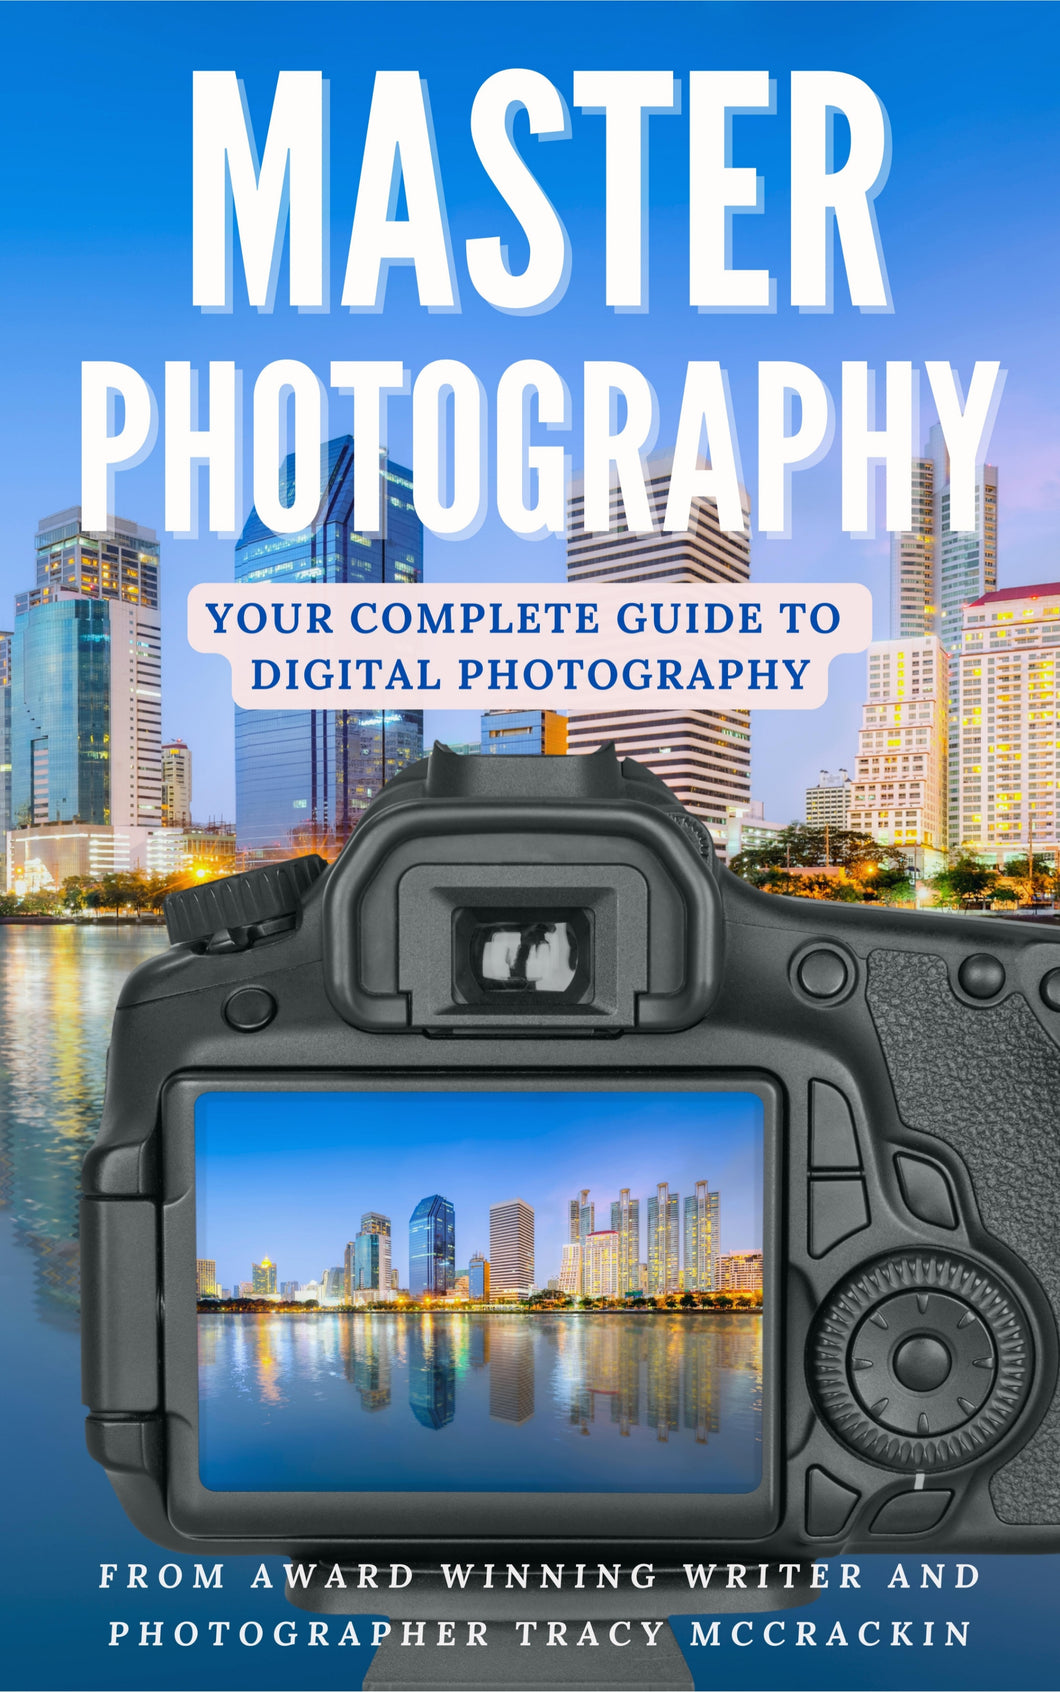 MASTER PHOTOGRAPHY BOOK, By Tracy McCrackin